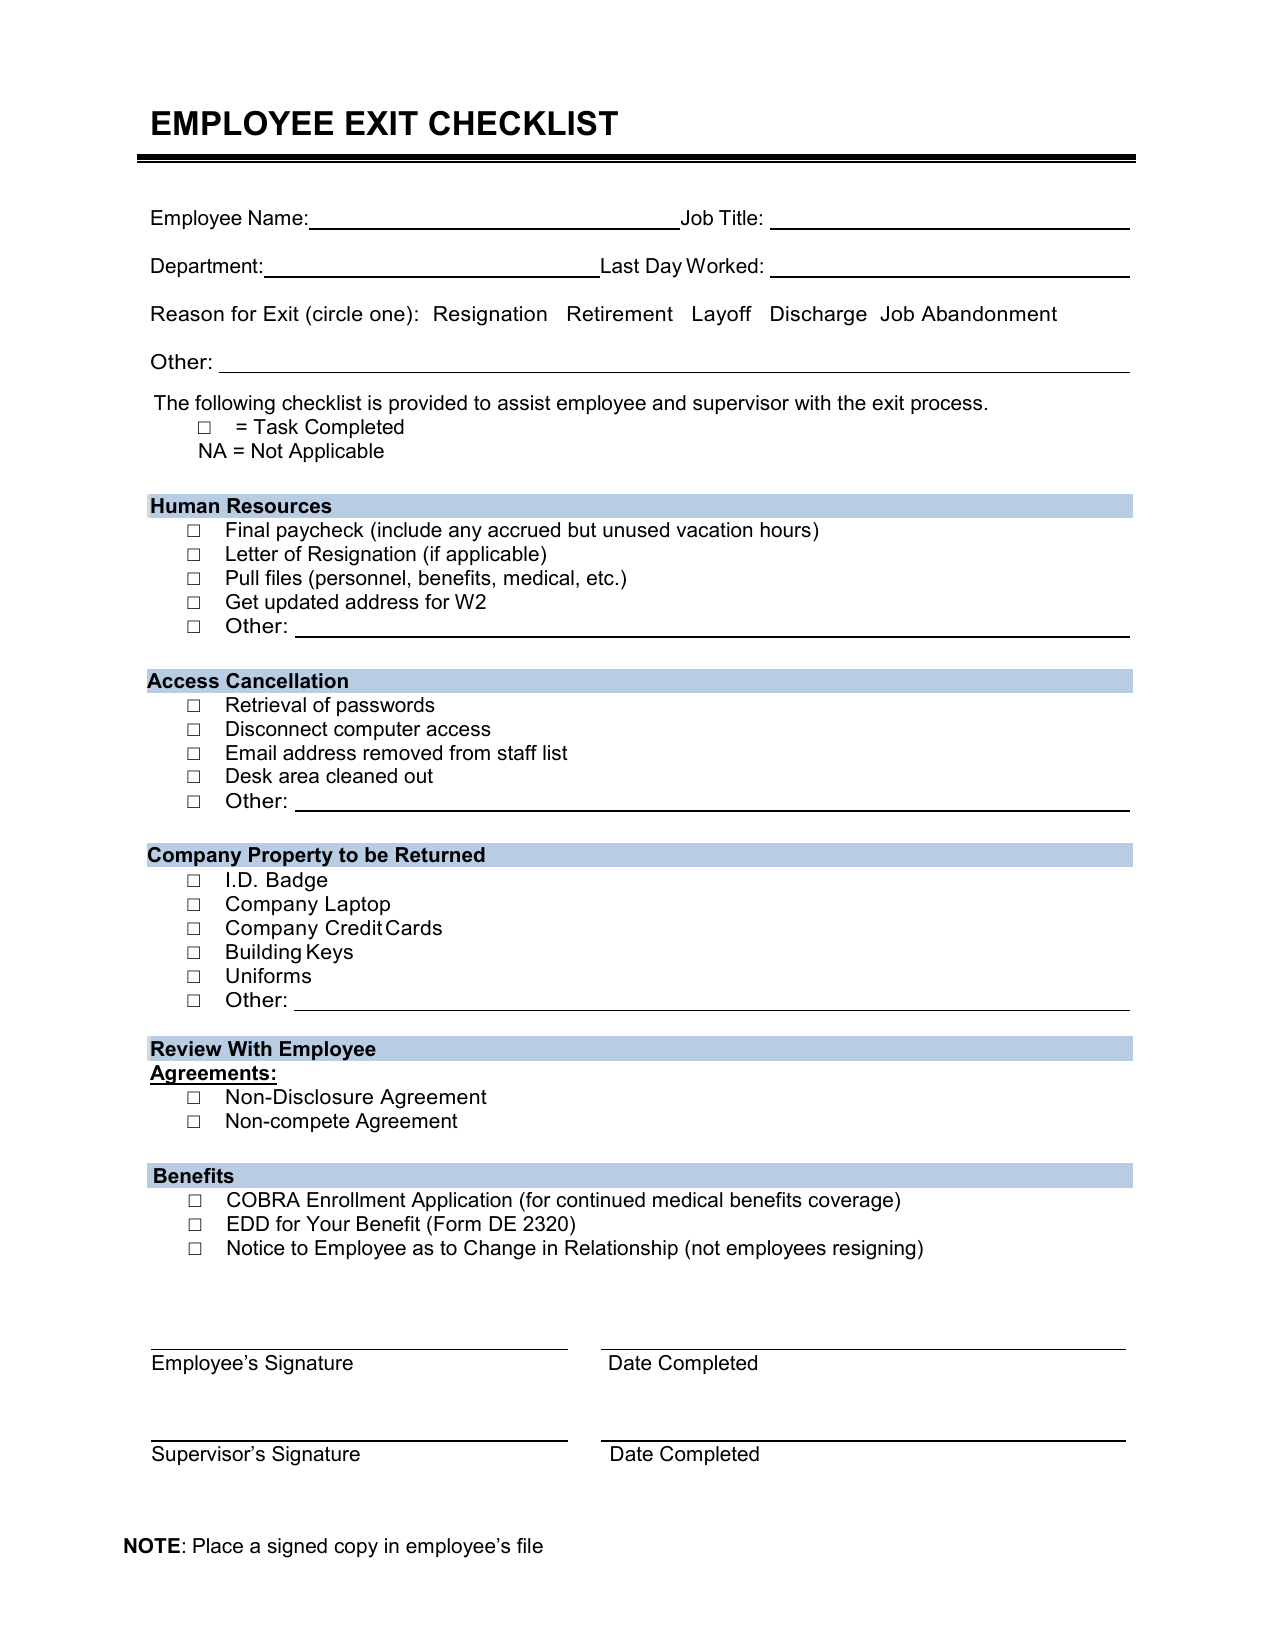 Top Employee Exit Checklist Templates Free To Download In Pdf Format ...